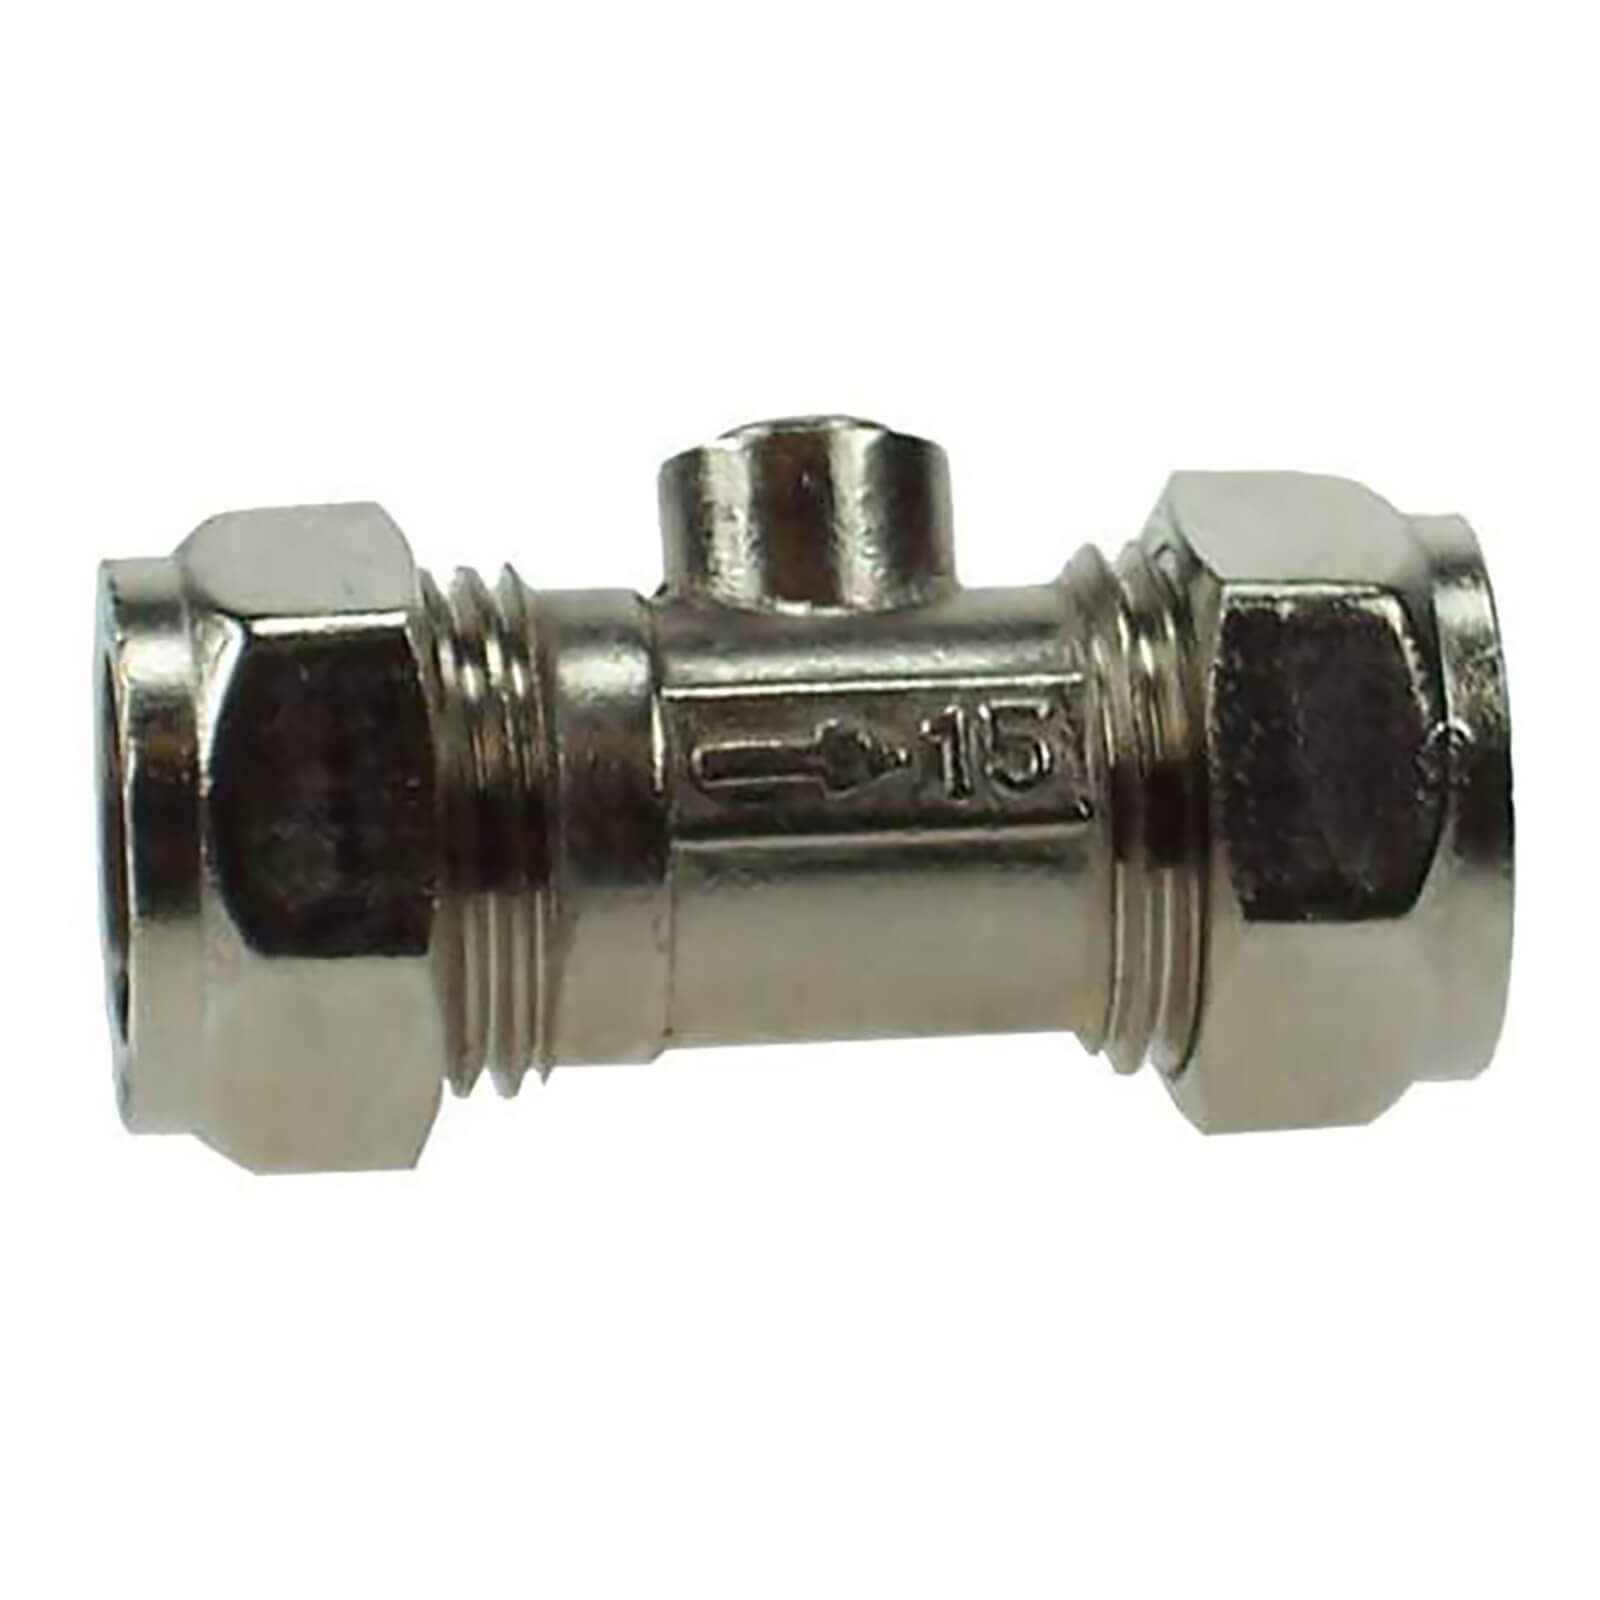 Isolation Valve Compression Fitting - Chrome - 15mm - 5 Pack